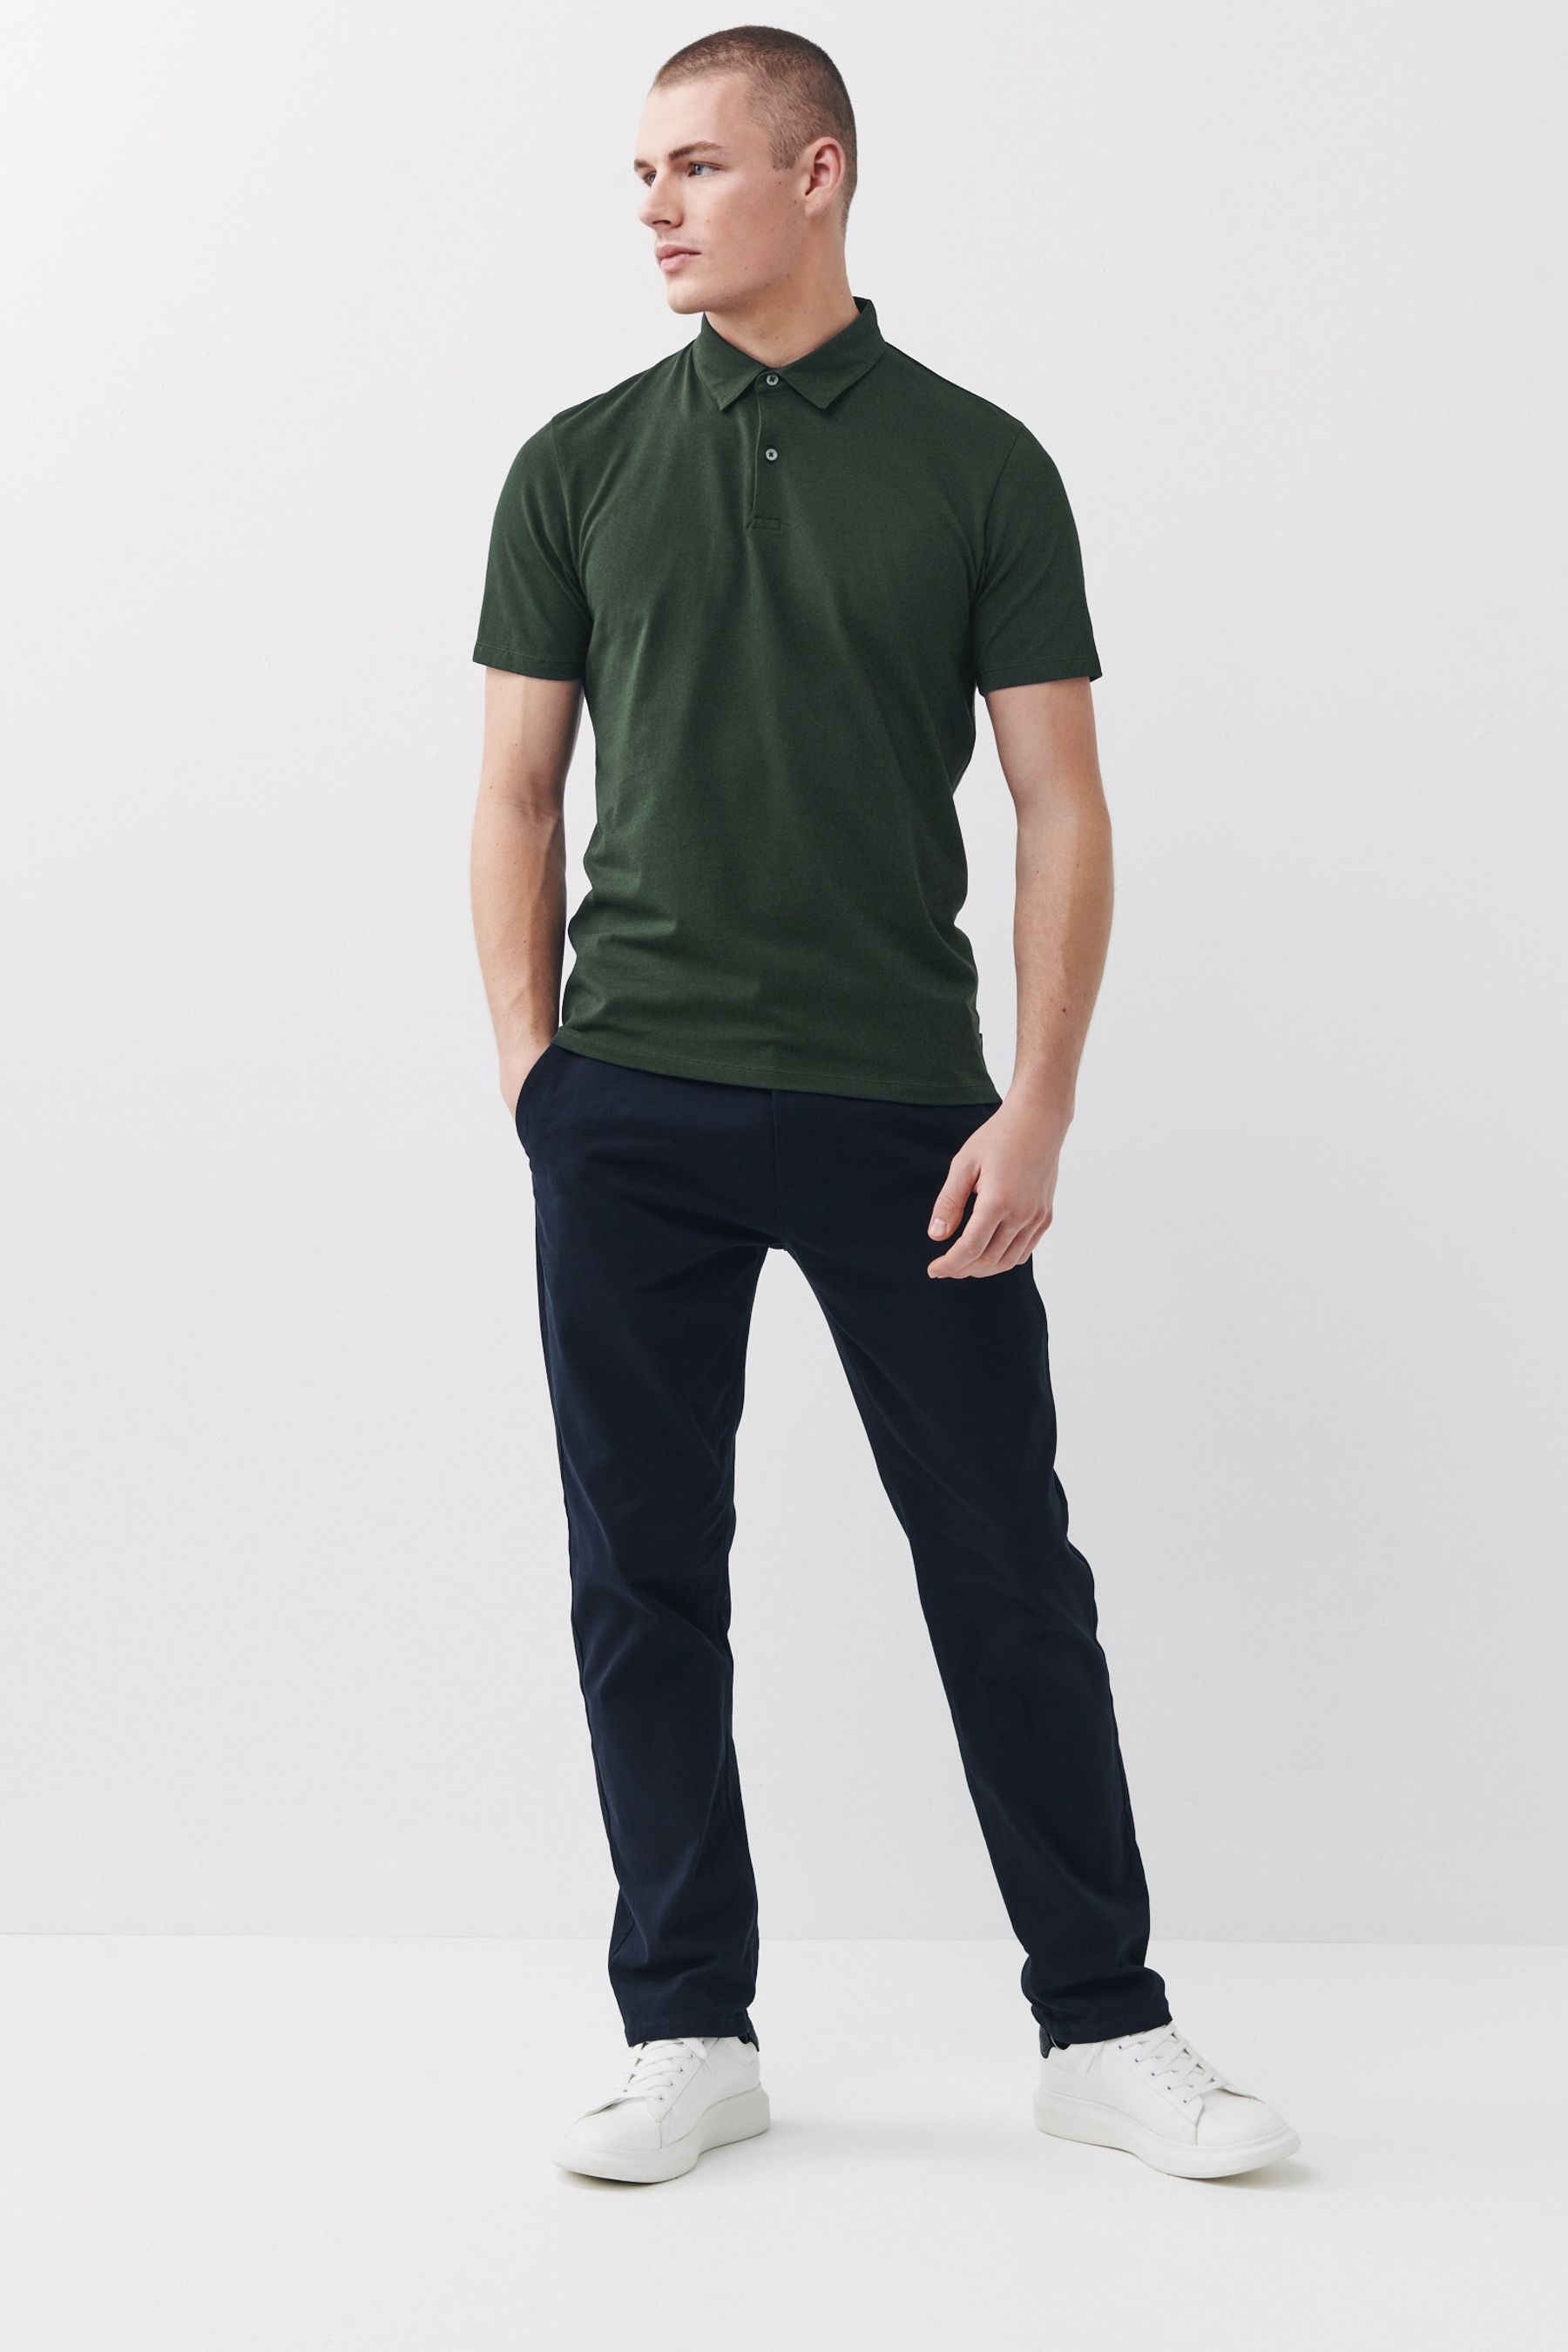 Buy Olive Green Regular Fit Polo Shirt from the Next UK online shop